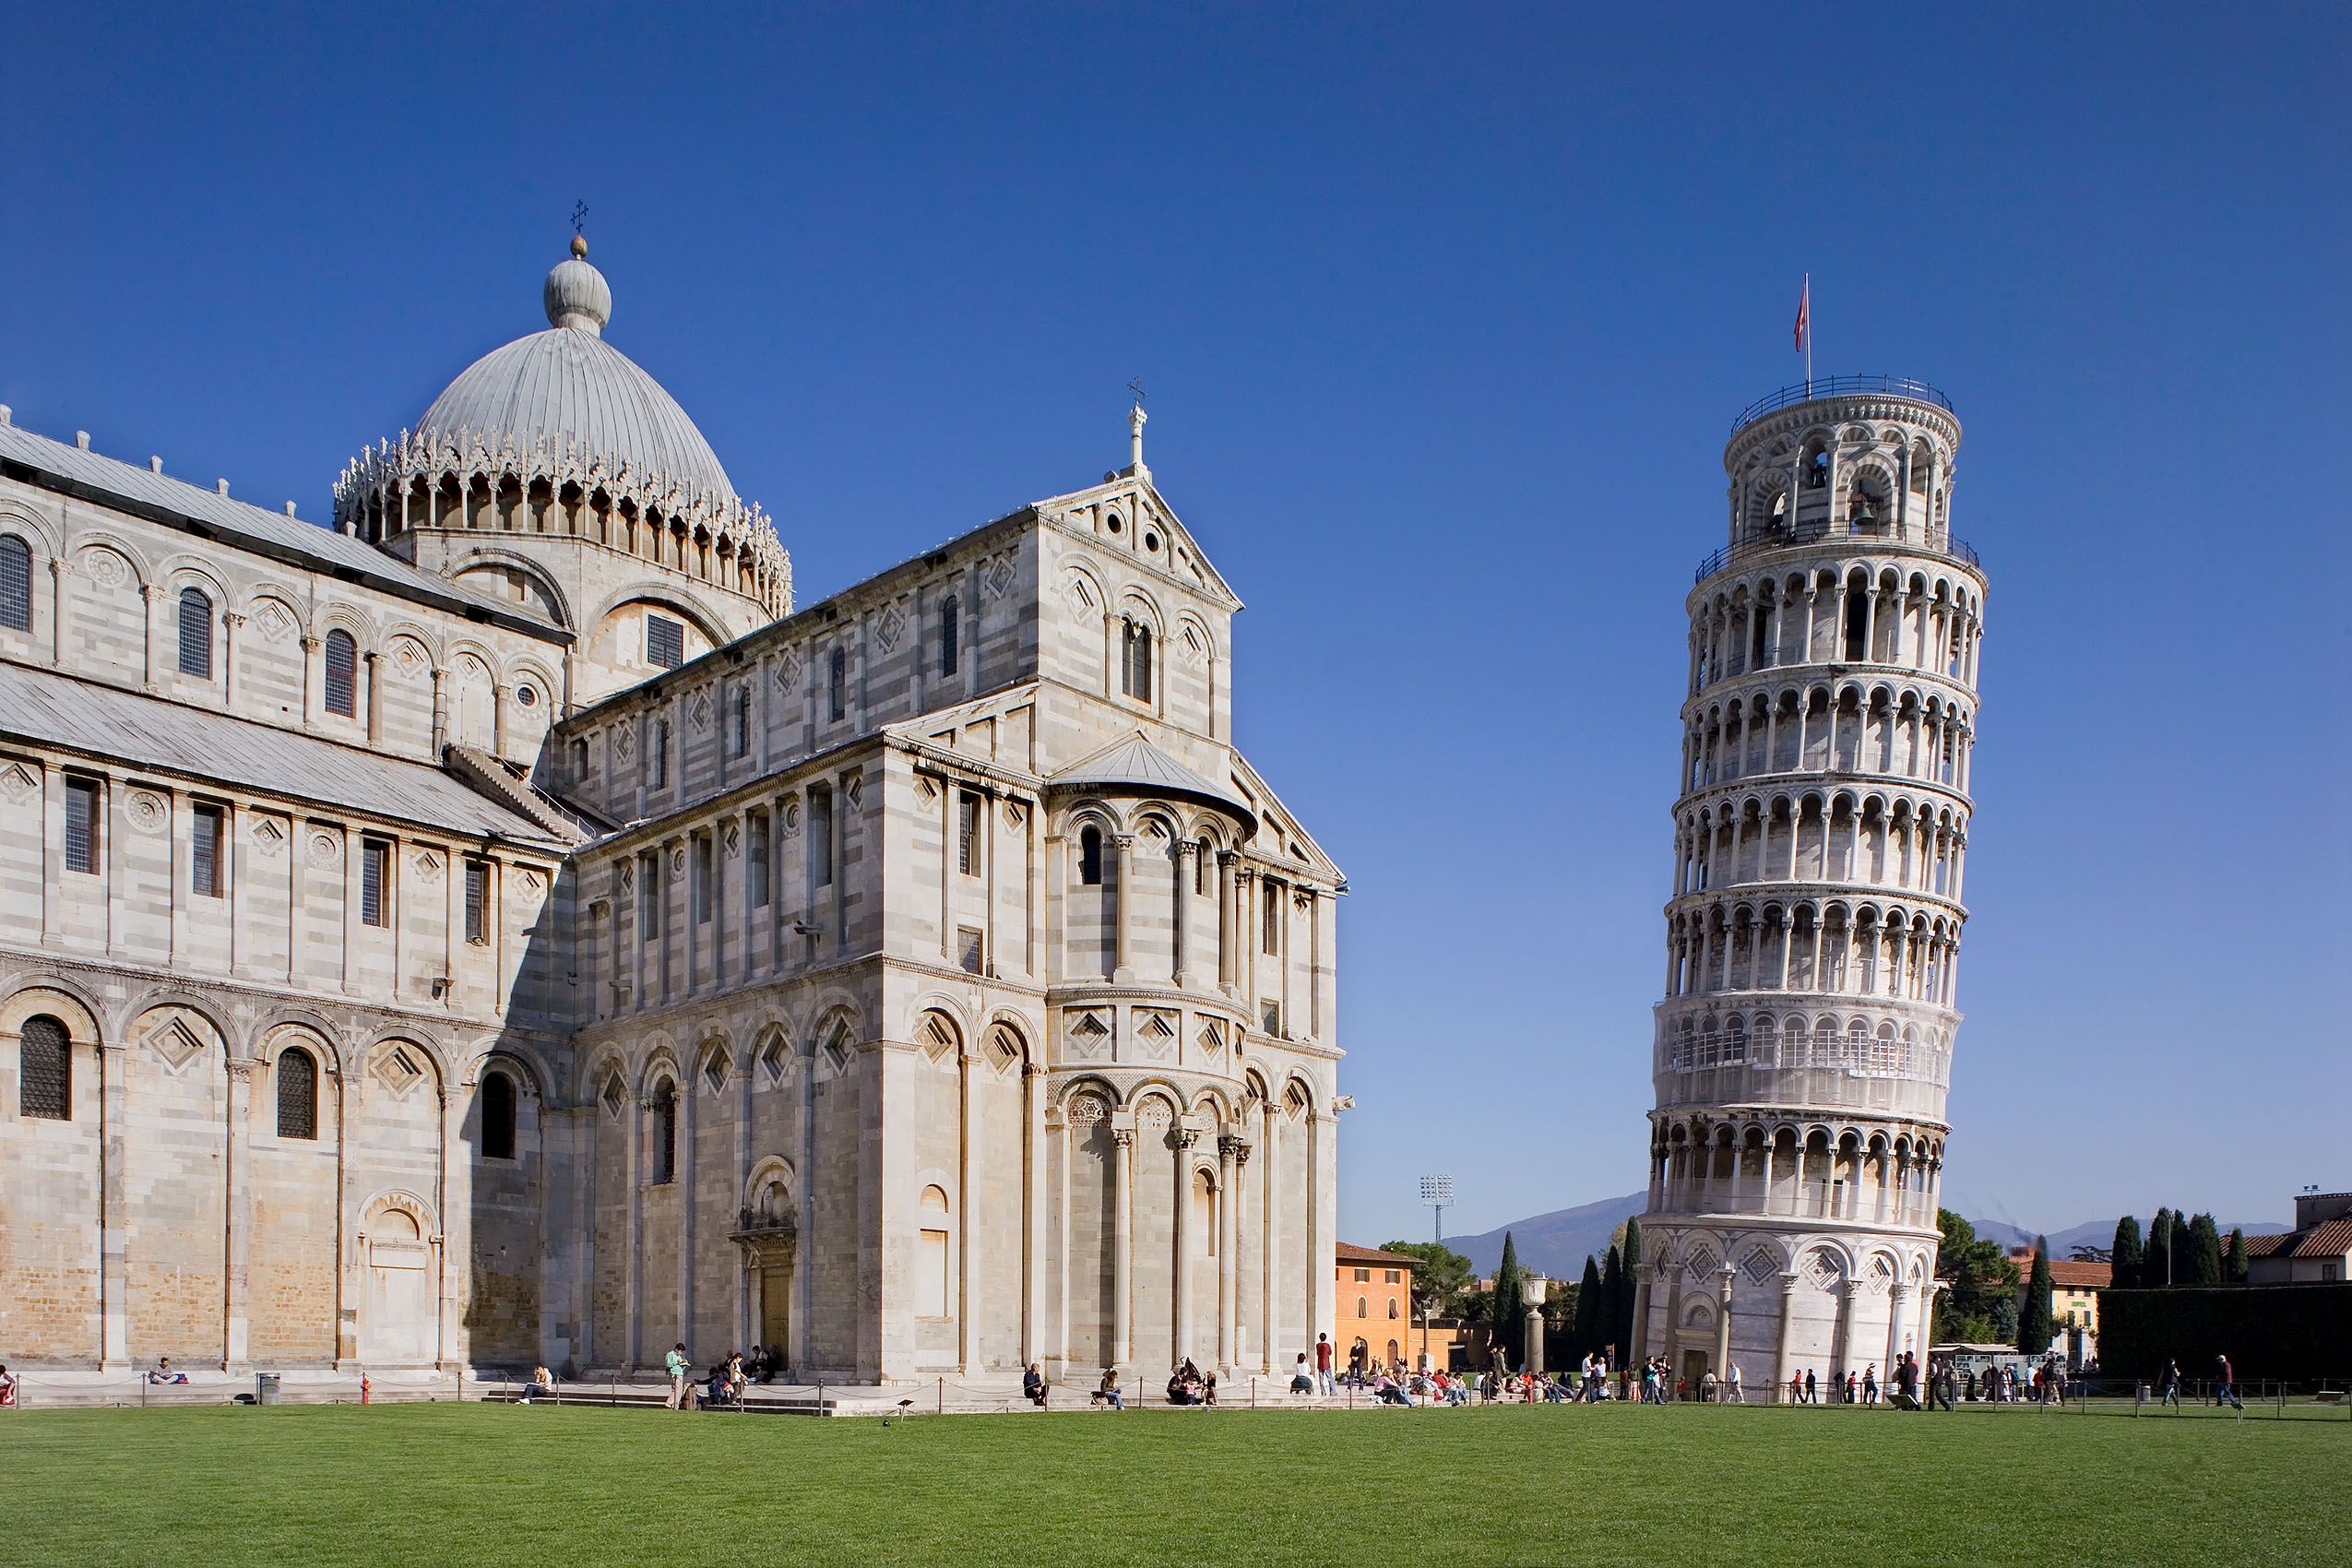 Leaning Tower of Pisa 2